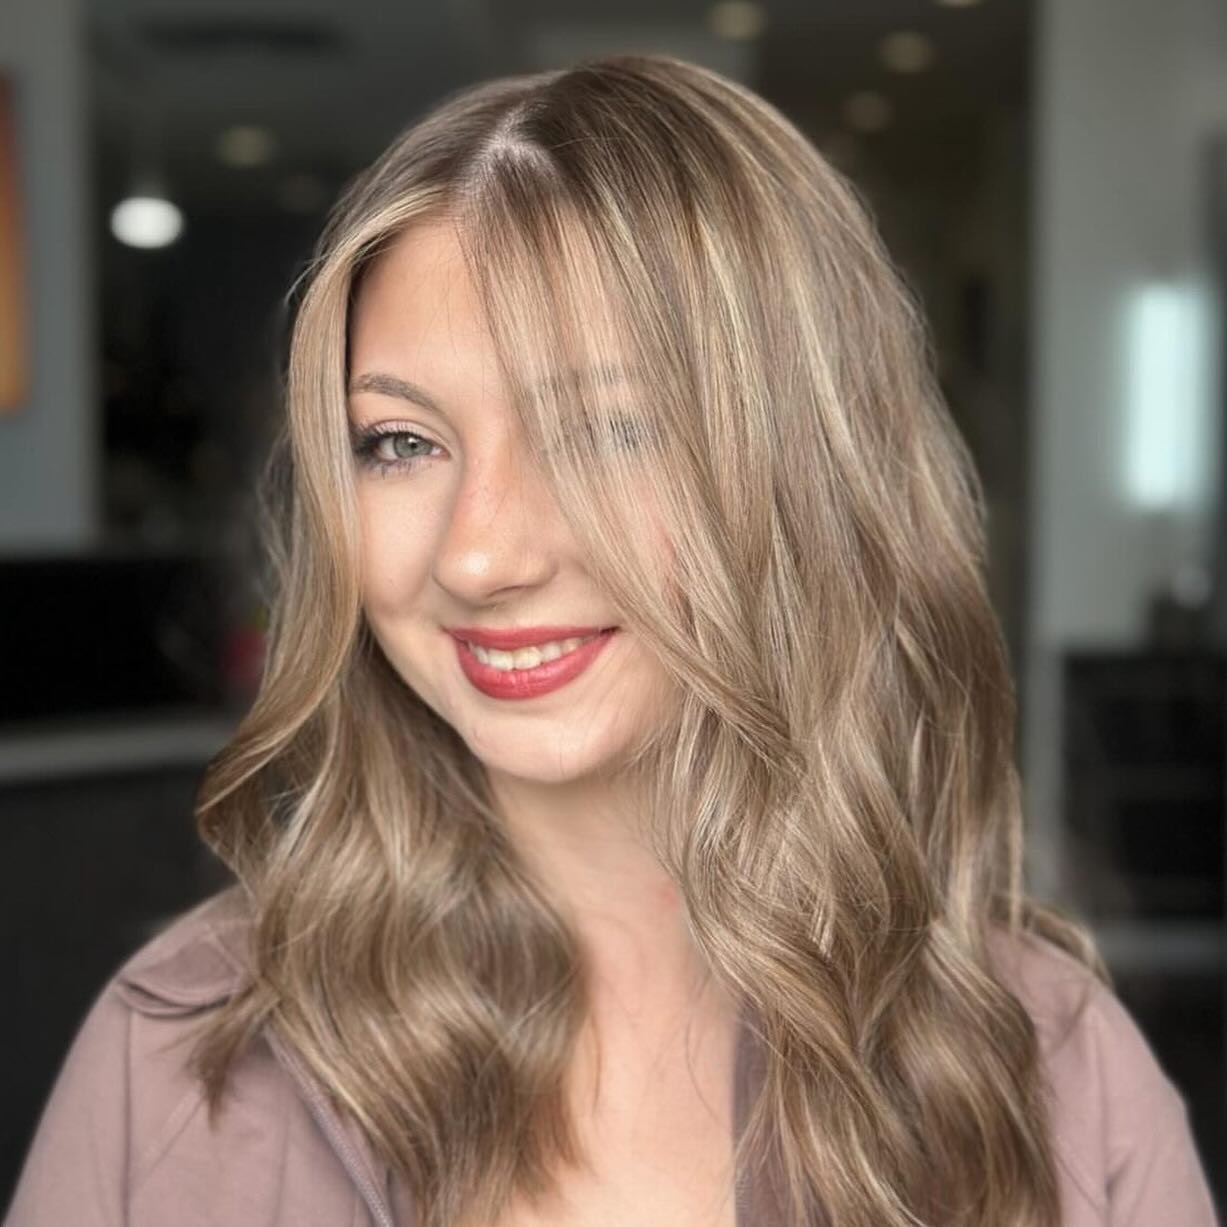 Grads, it&rsquo;s your time to shine!✨ 🎓

What is your go-to style? Curly, Straight, or a 90s blowout moment! 
We&rsquo;ve got you covered for the big day! 👏🏼
Feel confident and photoshoot ready with a shampoo &amp; style along with a &ldquo;Touch